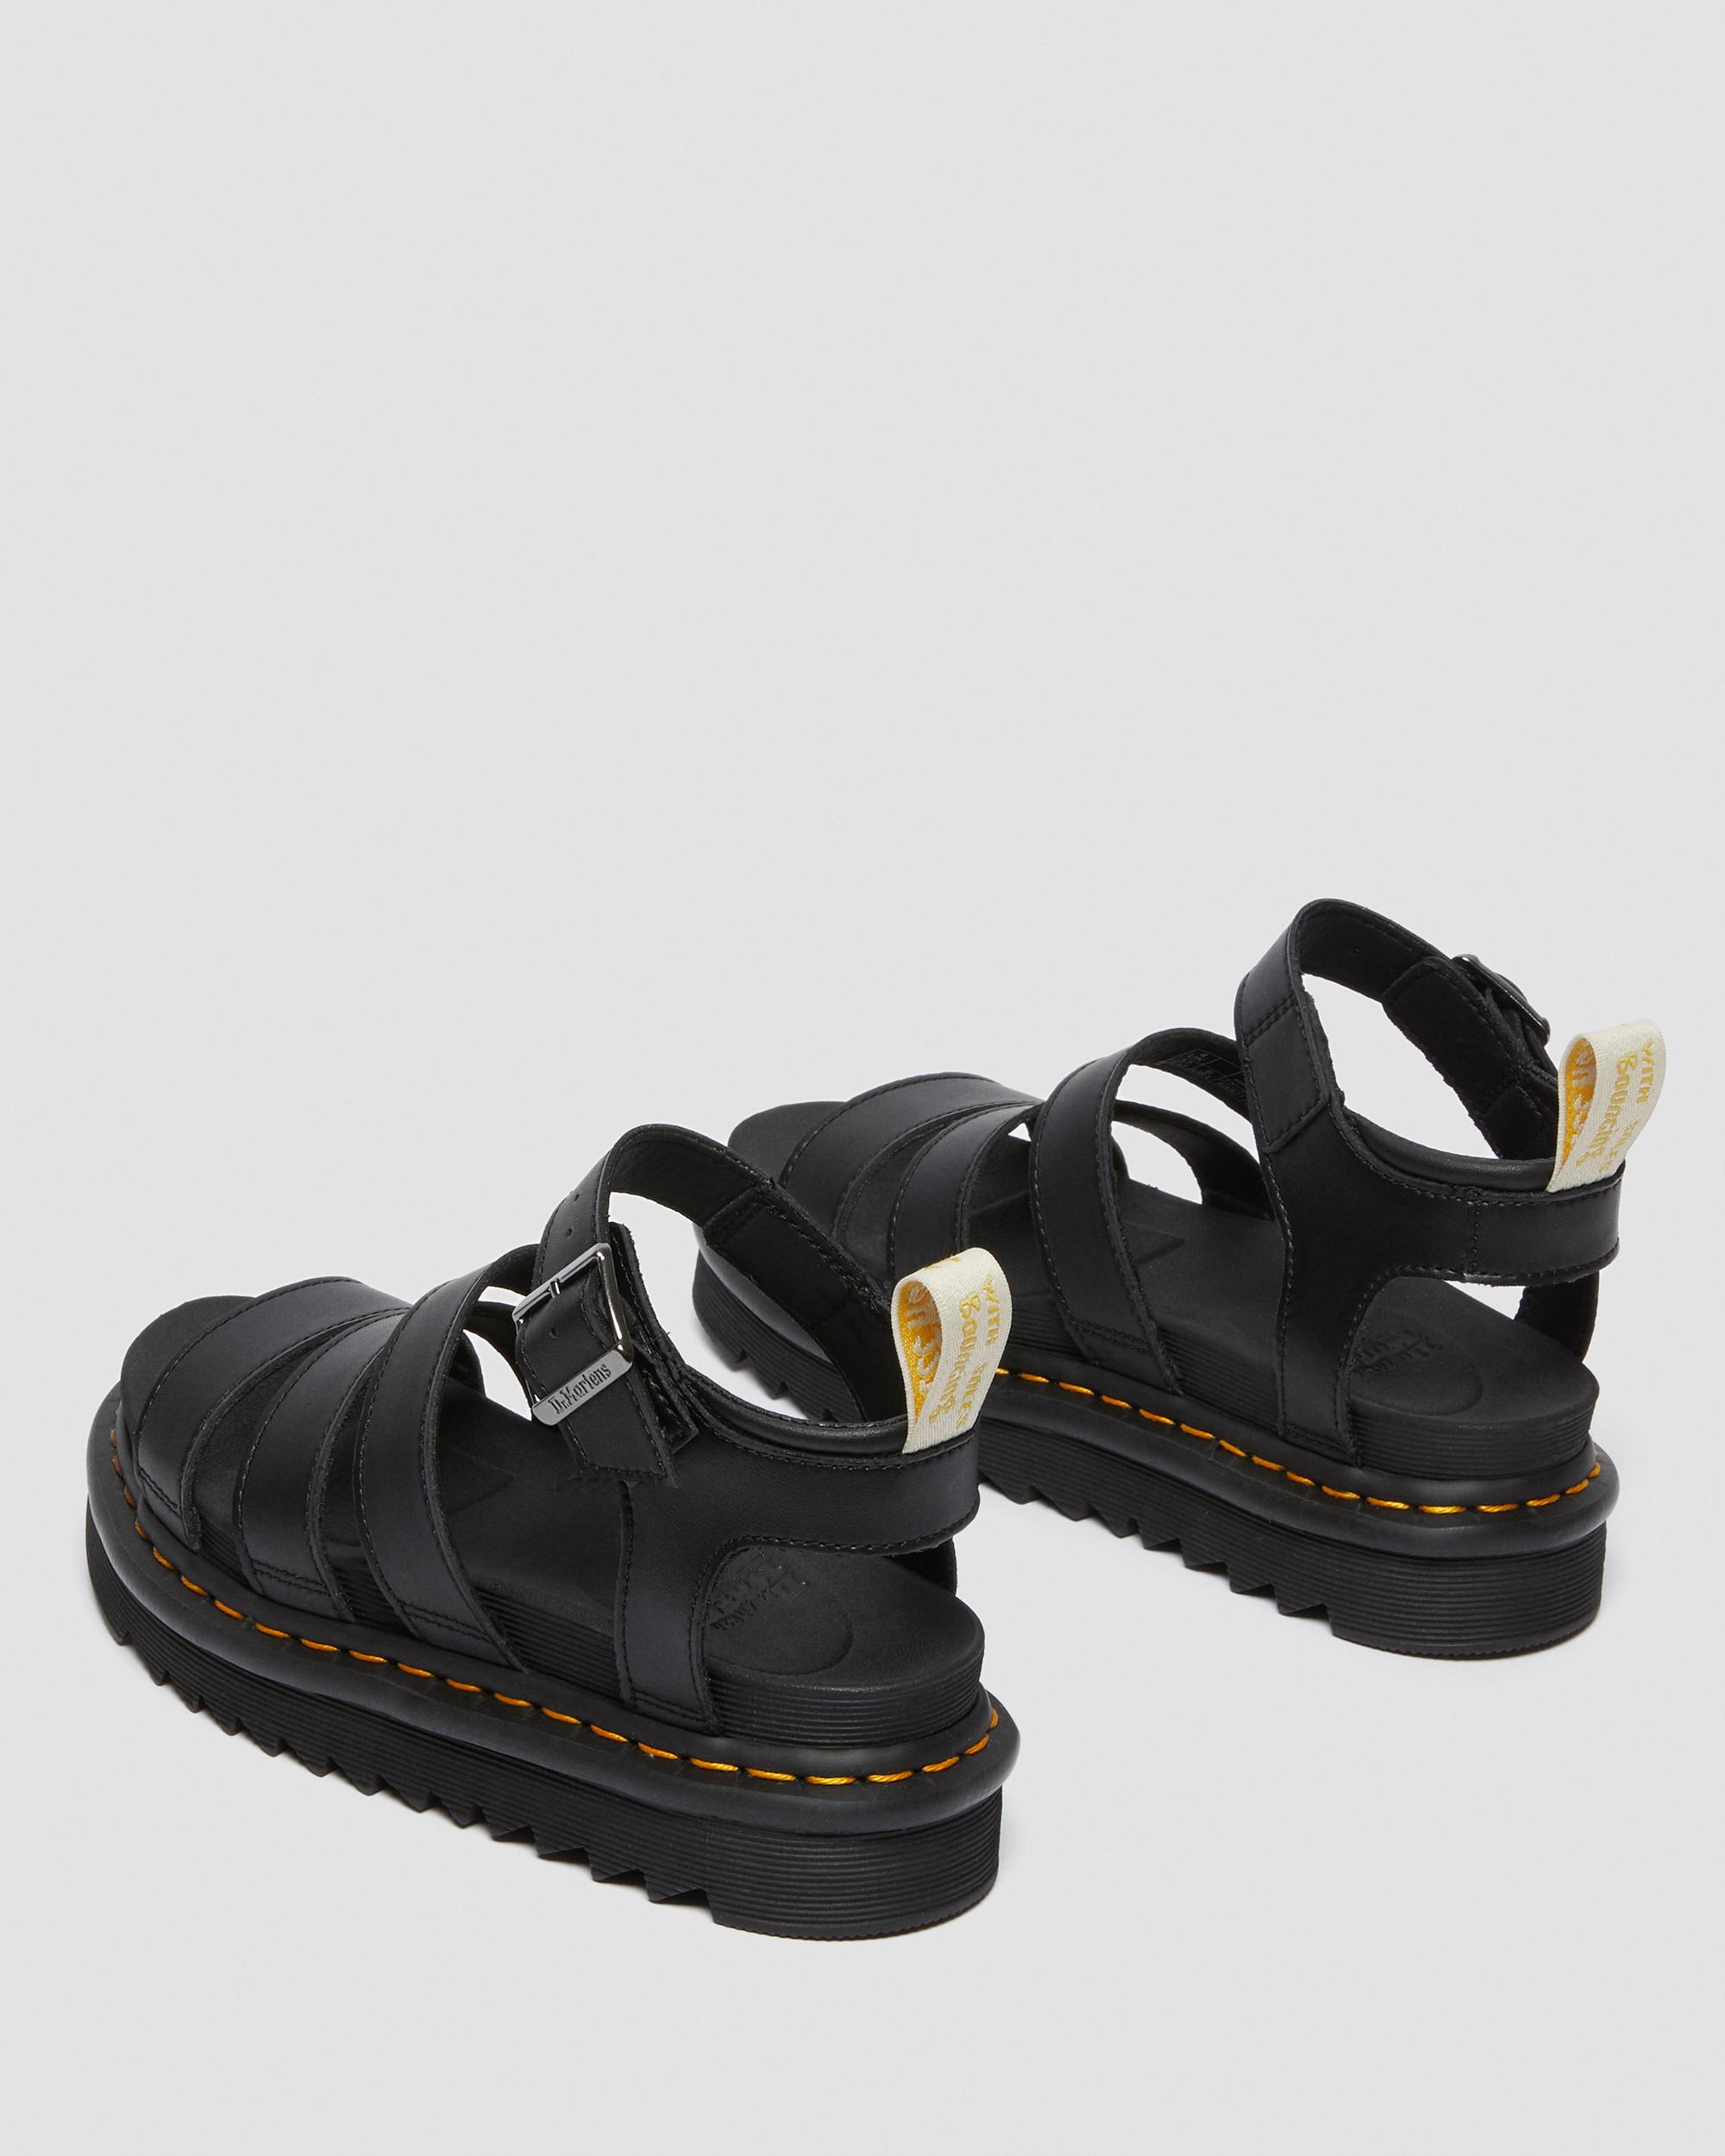 Sale > dr martens blaire leather slide sandals > in stock